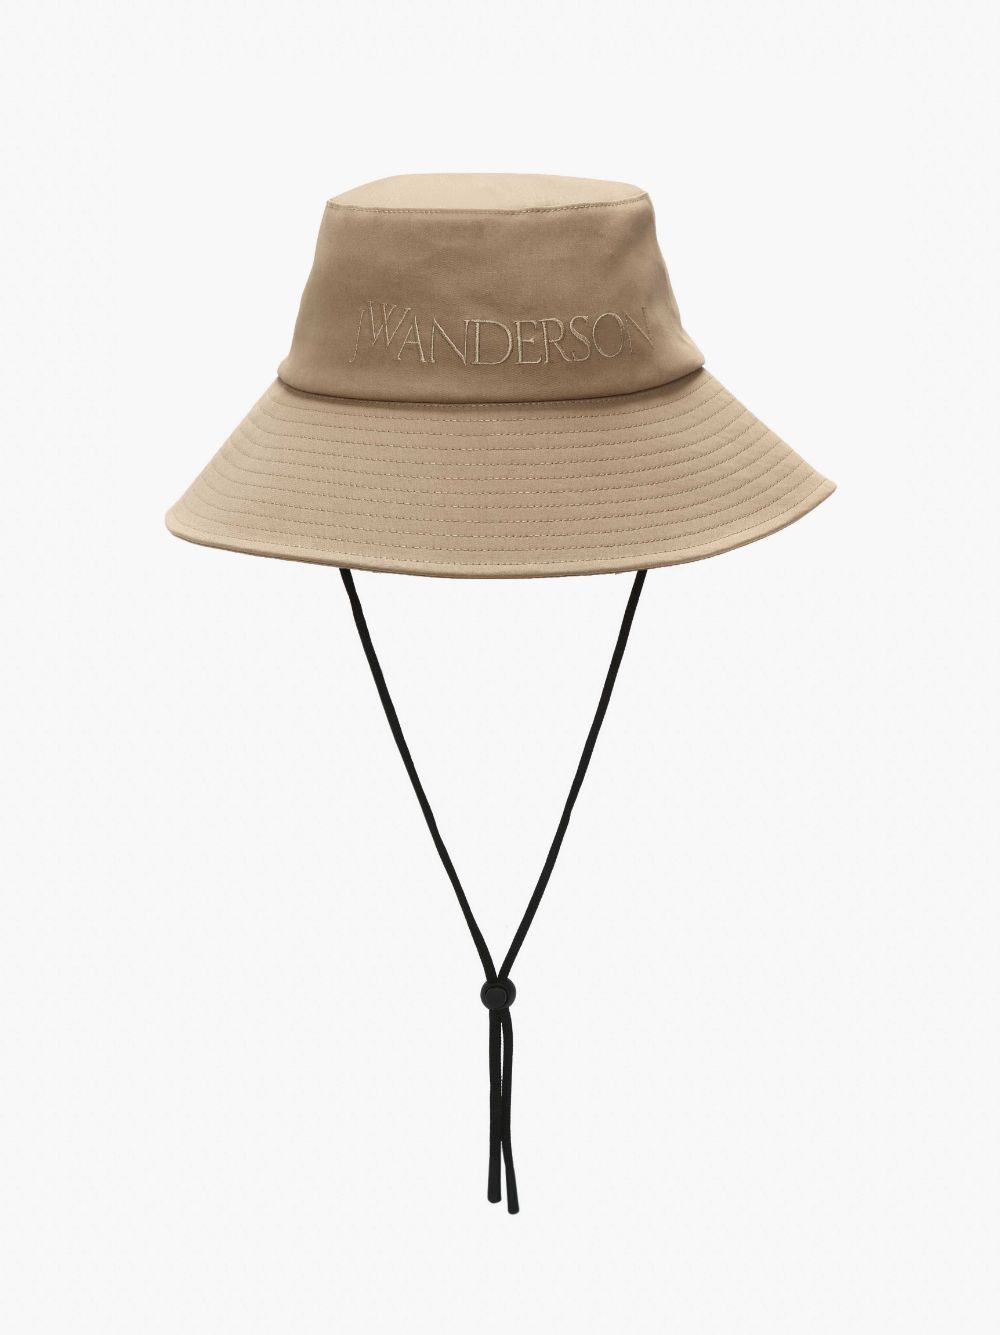 https://cdn-images.farfetch-contents.com/jw-anderson-shade-hat-with-logo_21289197_52256289_1000.jpg